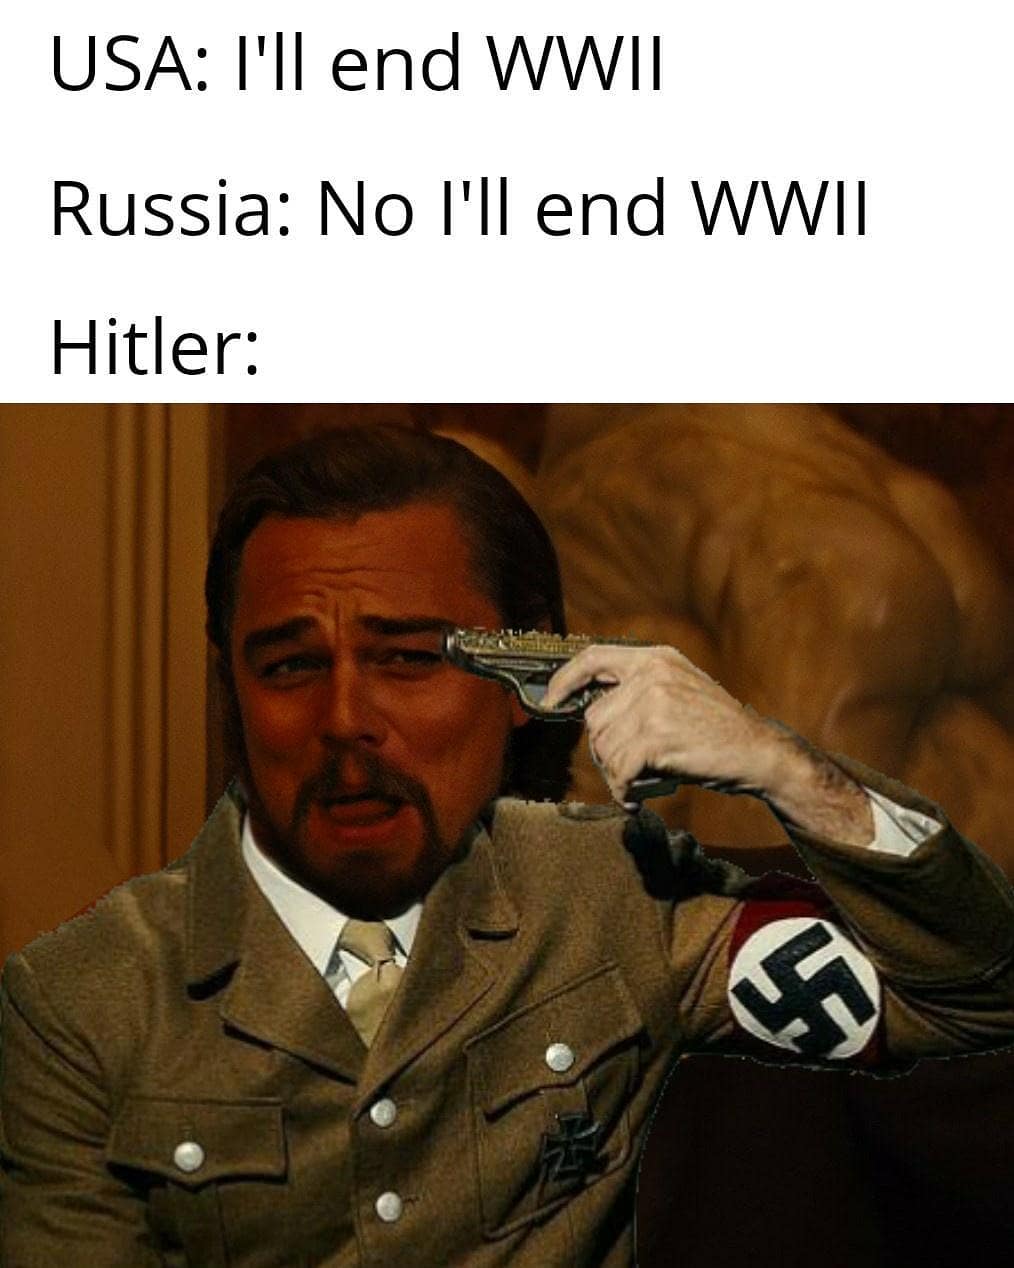 USA: I'll end WWII. Russia: No I'll end WWII. Hitler: